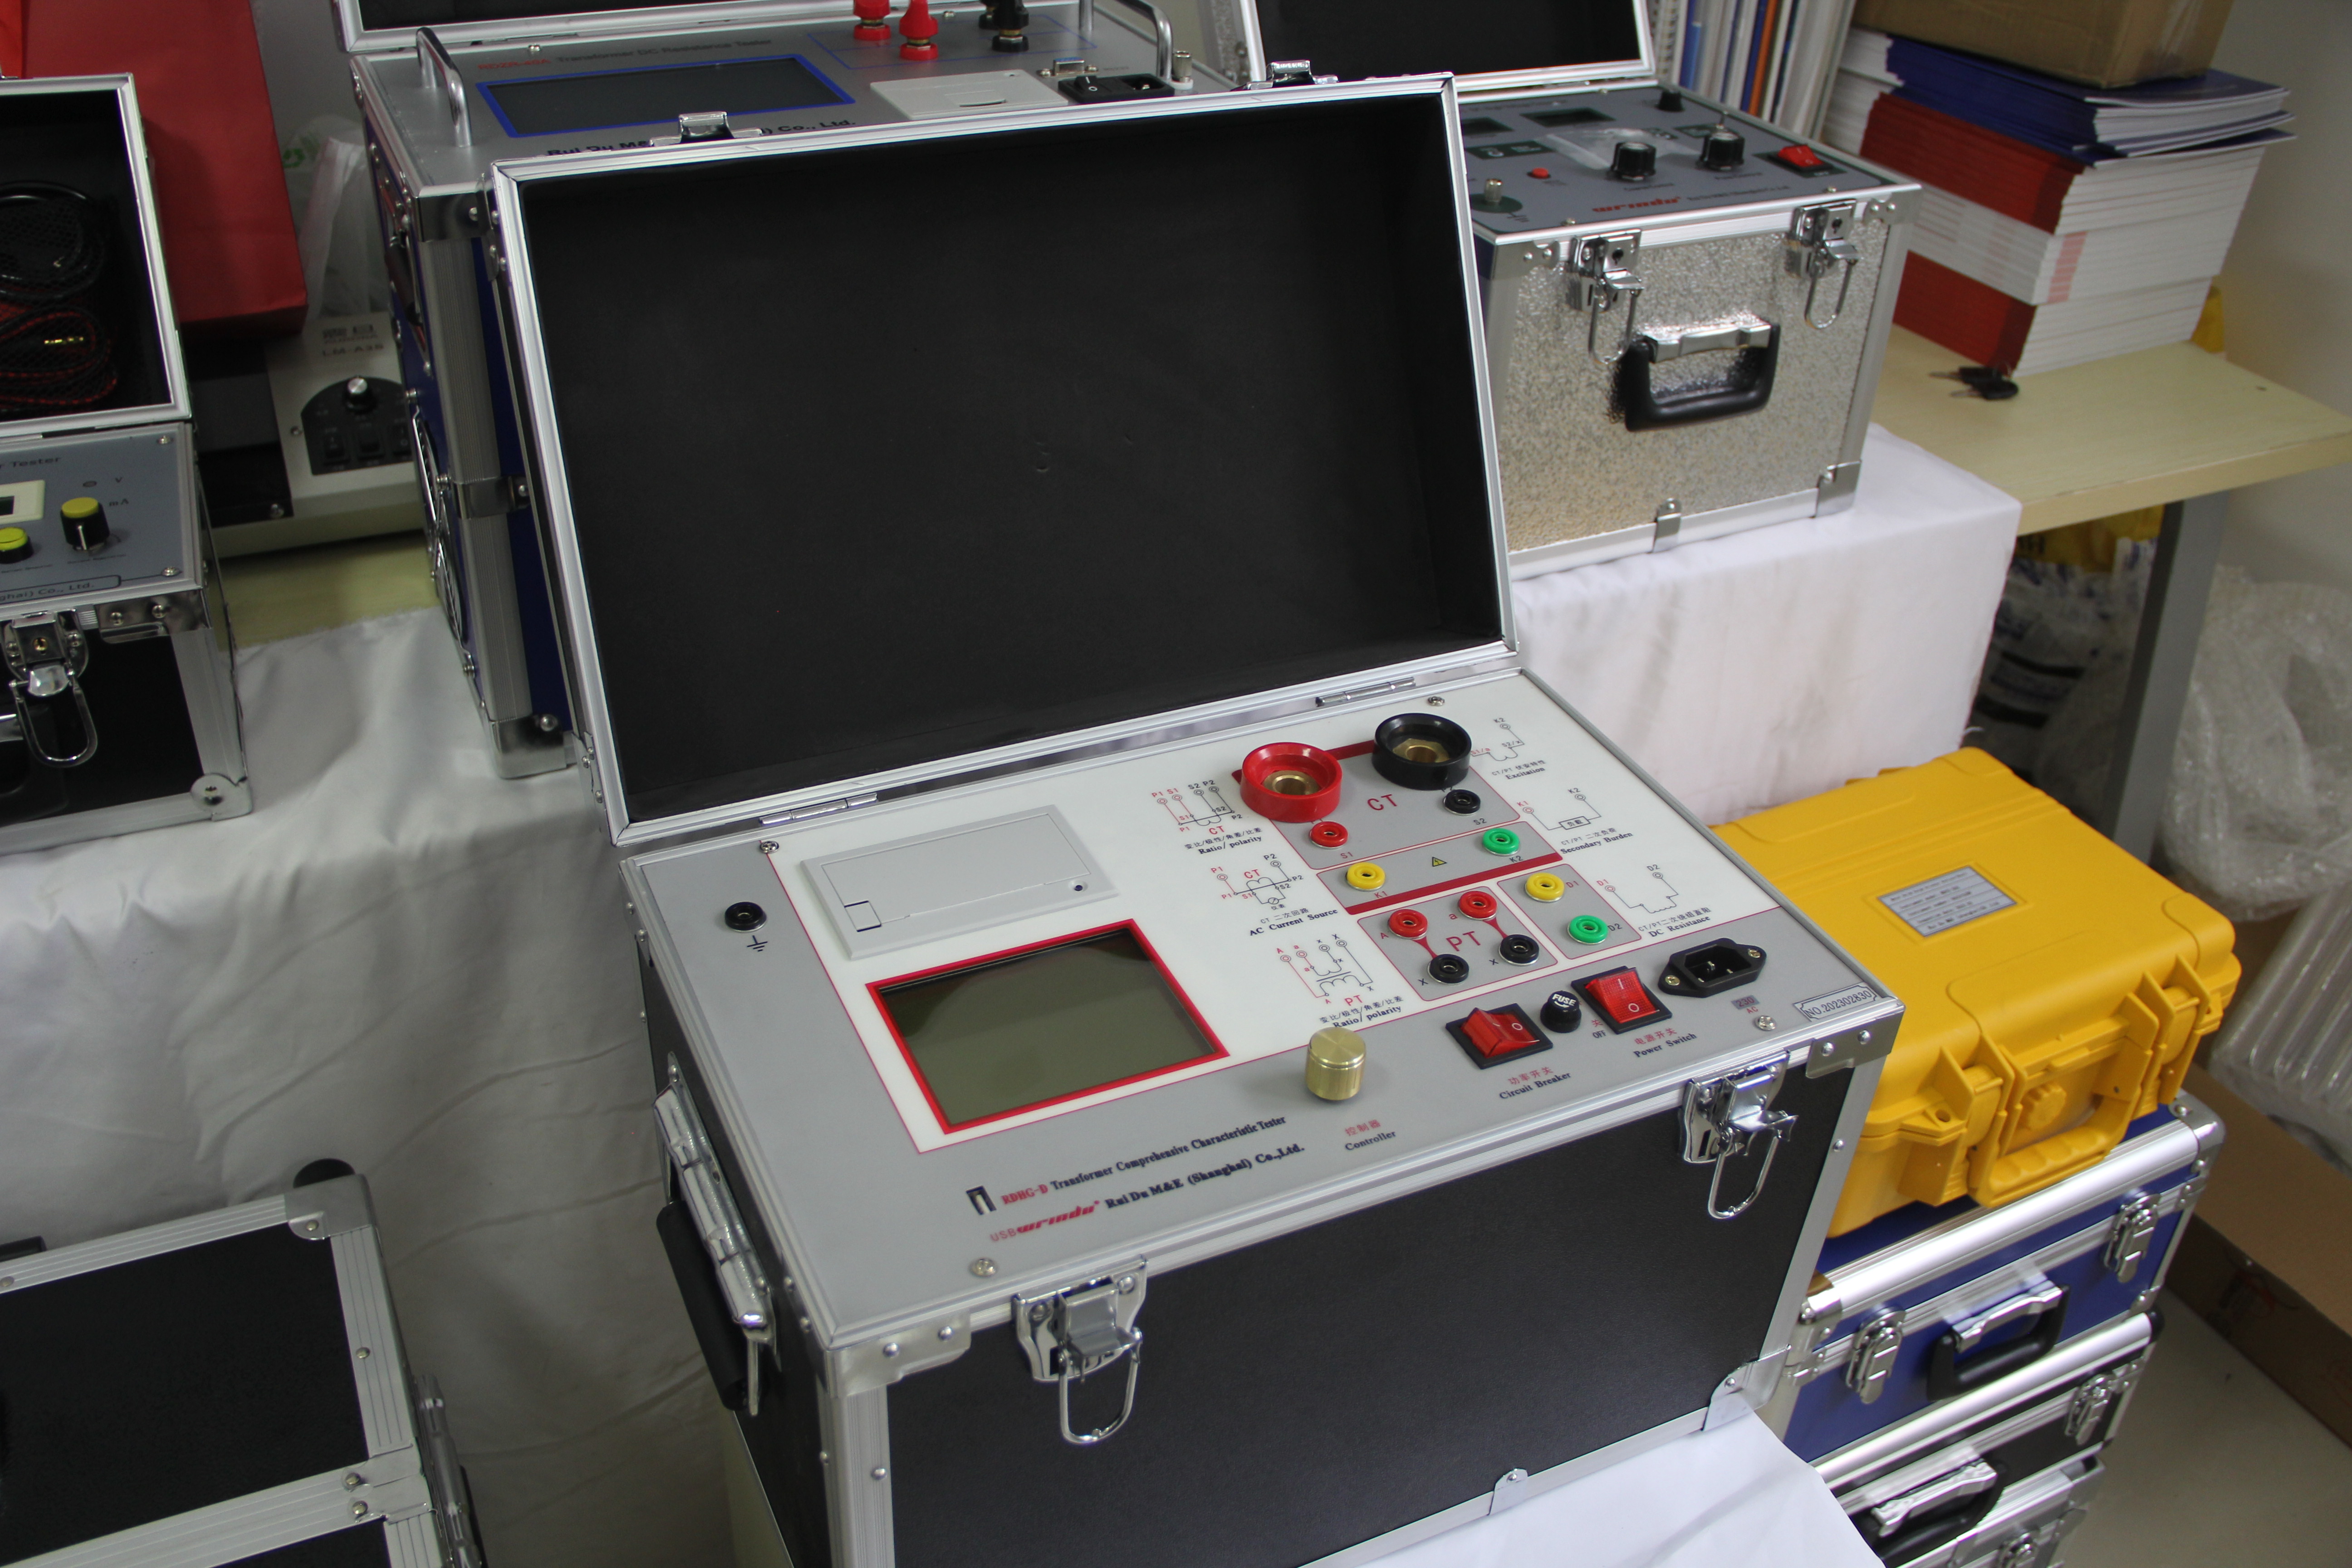 Delivery of High-Quality Power Testing Equipment to Customers